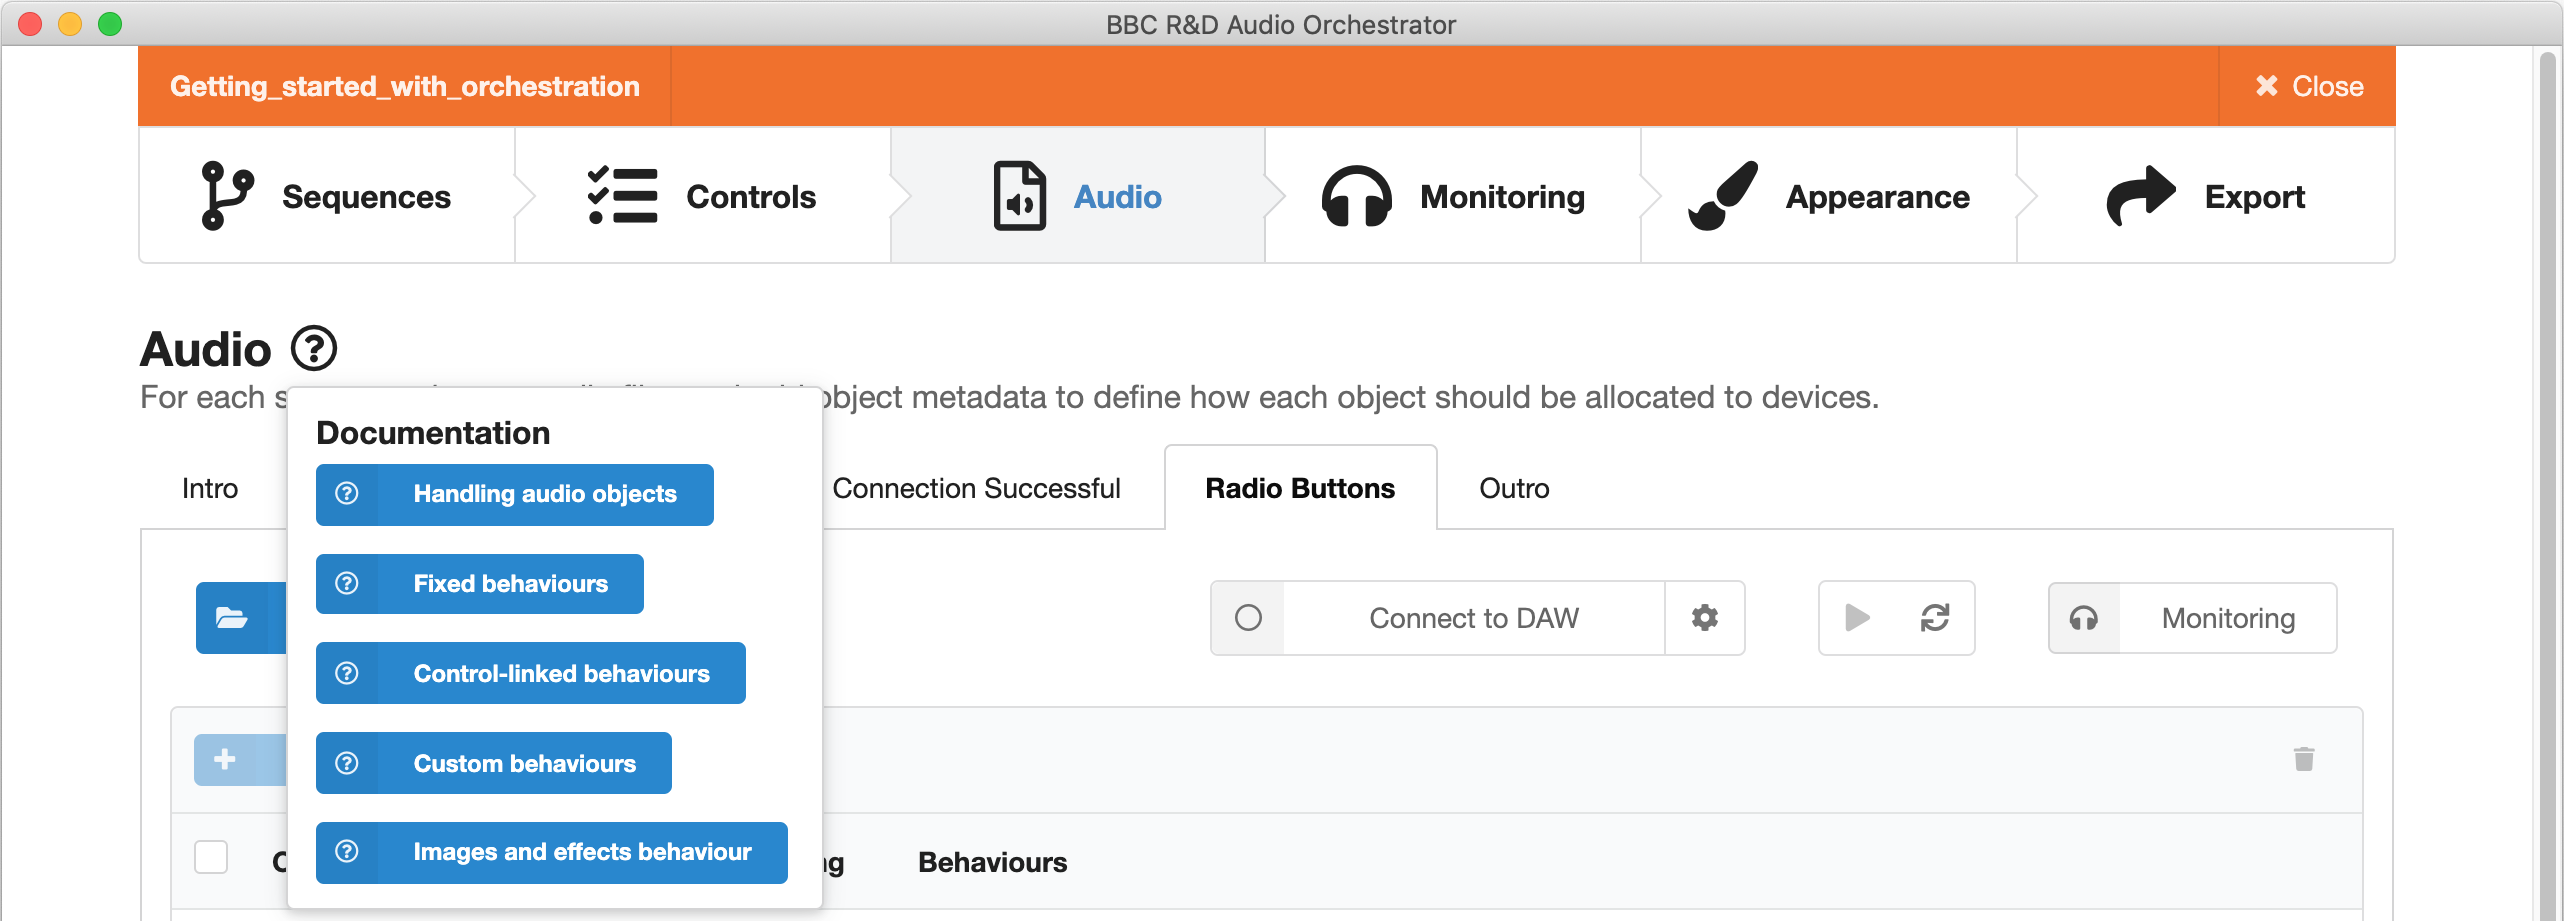 Screenshot of Audio Orchestrator after clicking the question mark icon, showing buttons linking to various pages of the documentation